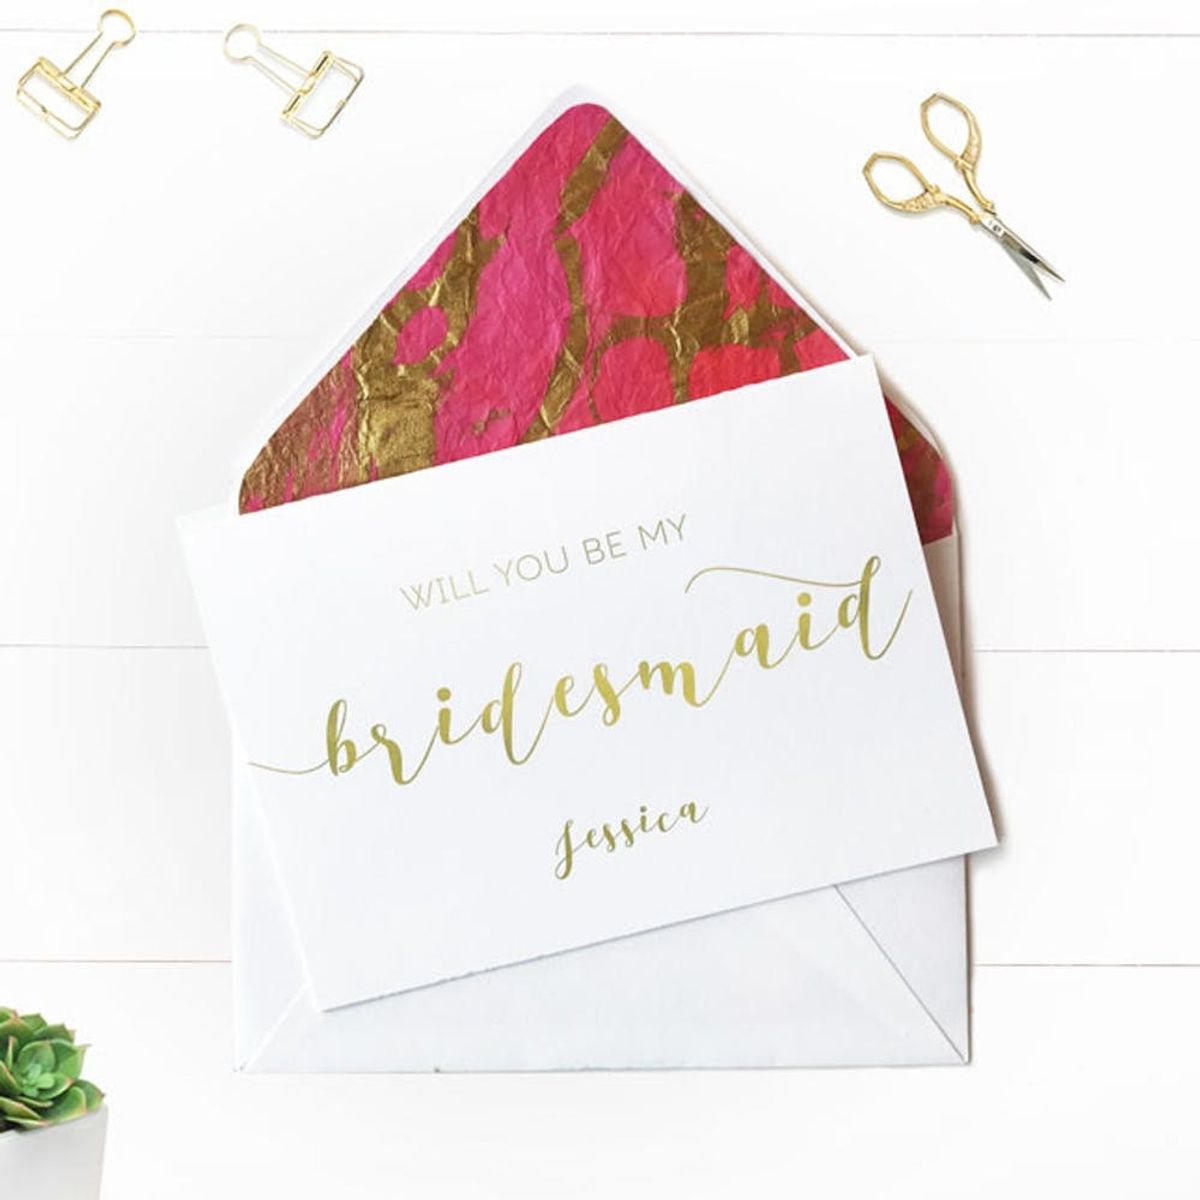 You Can Now DIY Your Own Wedding Invites With This Website